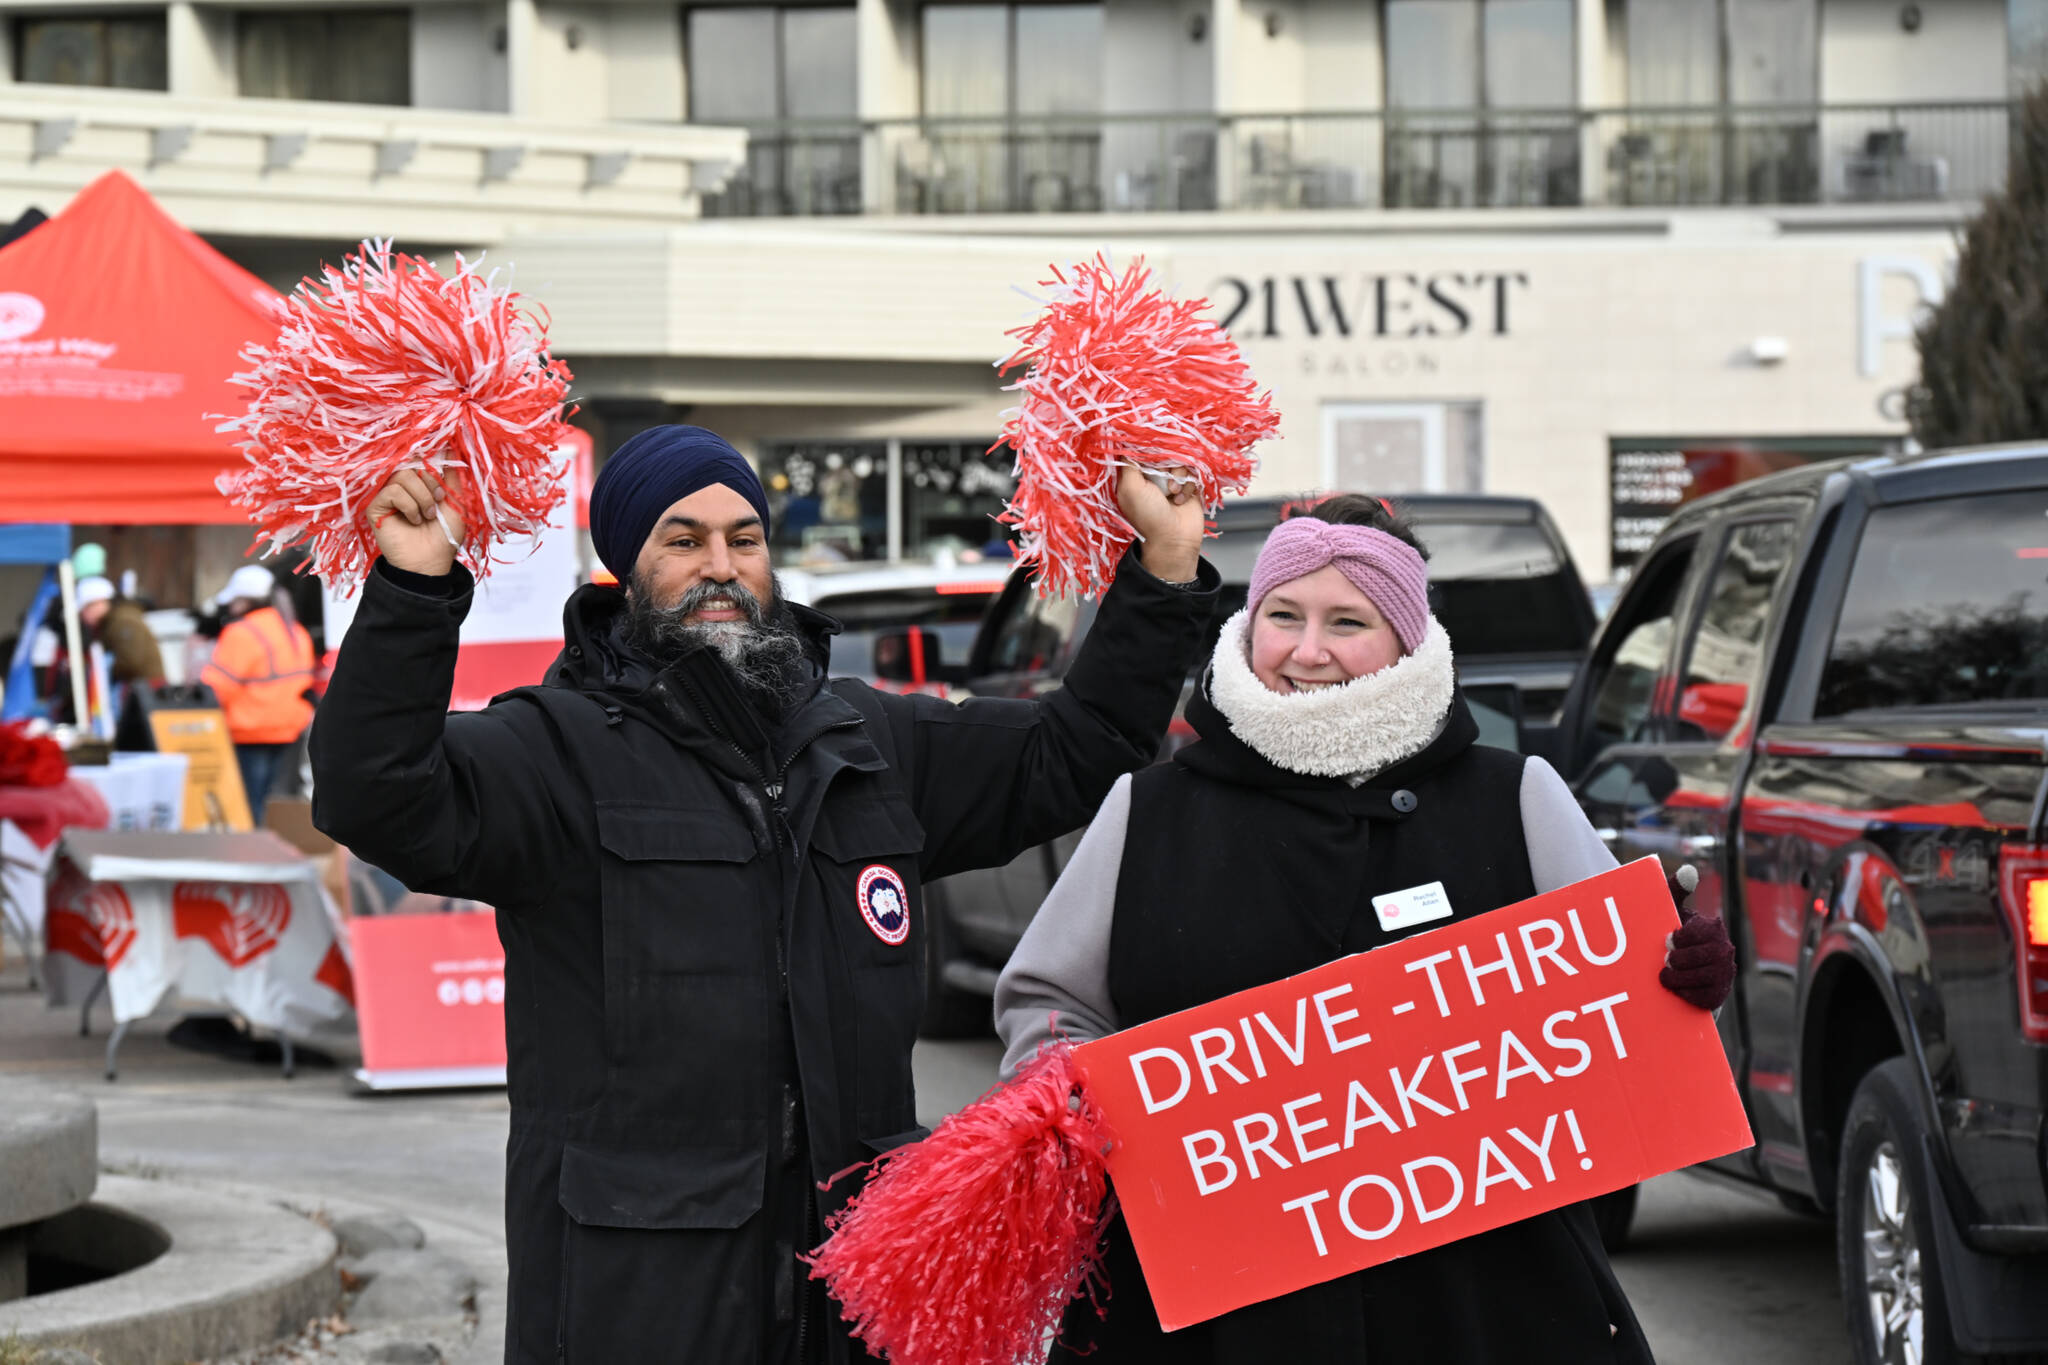 NDP Leader Jagmeet Singh cheers on drivers as they arrive at the United Way's annual fundraiser on March 2. (Brennan Phillips - Western News)